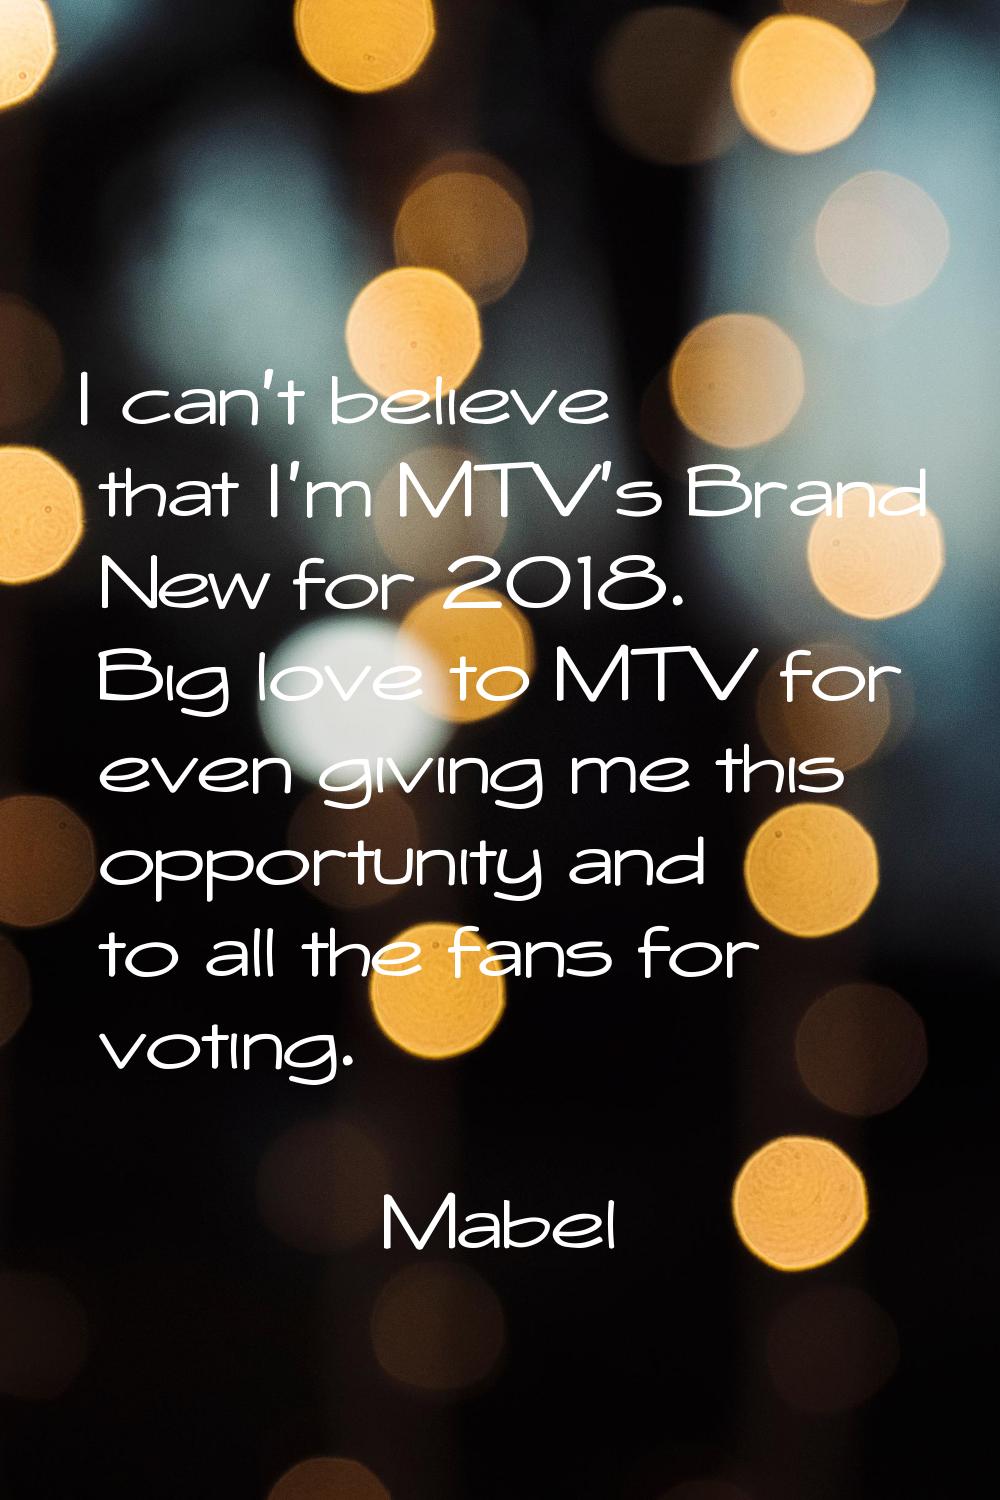 I can't believe that I'm MTV's Brand New for 2018. Big love to MTV for even giving me this opportun